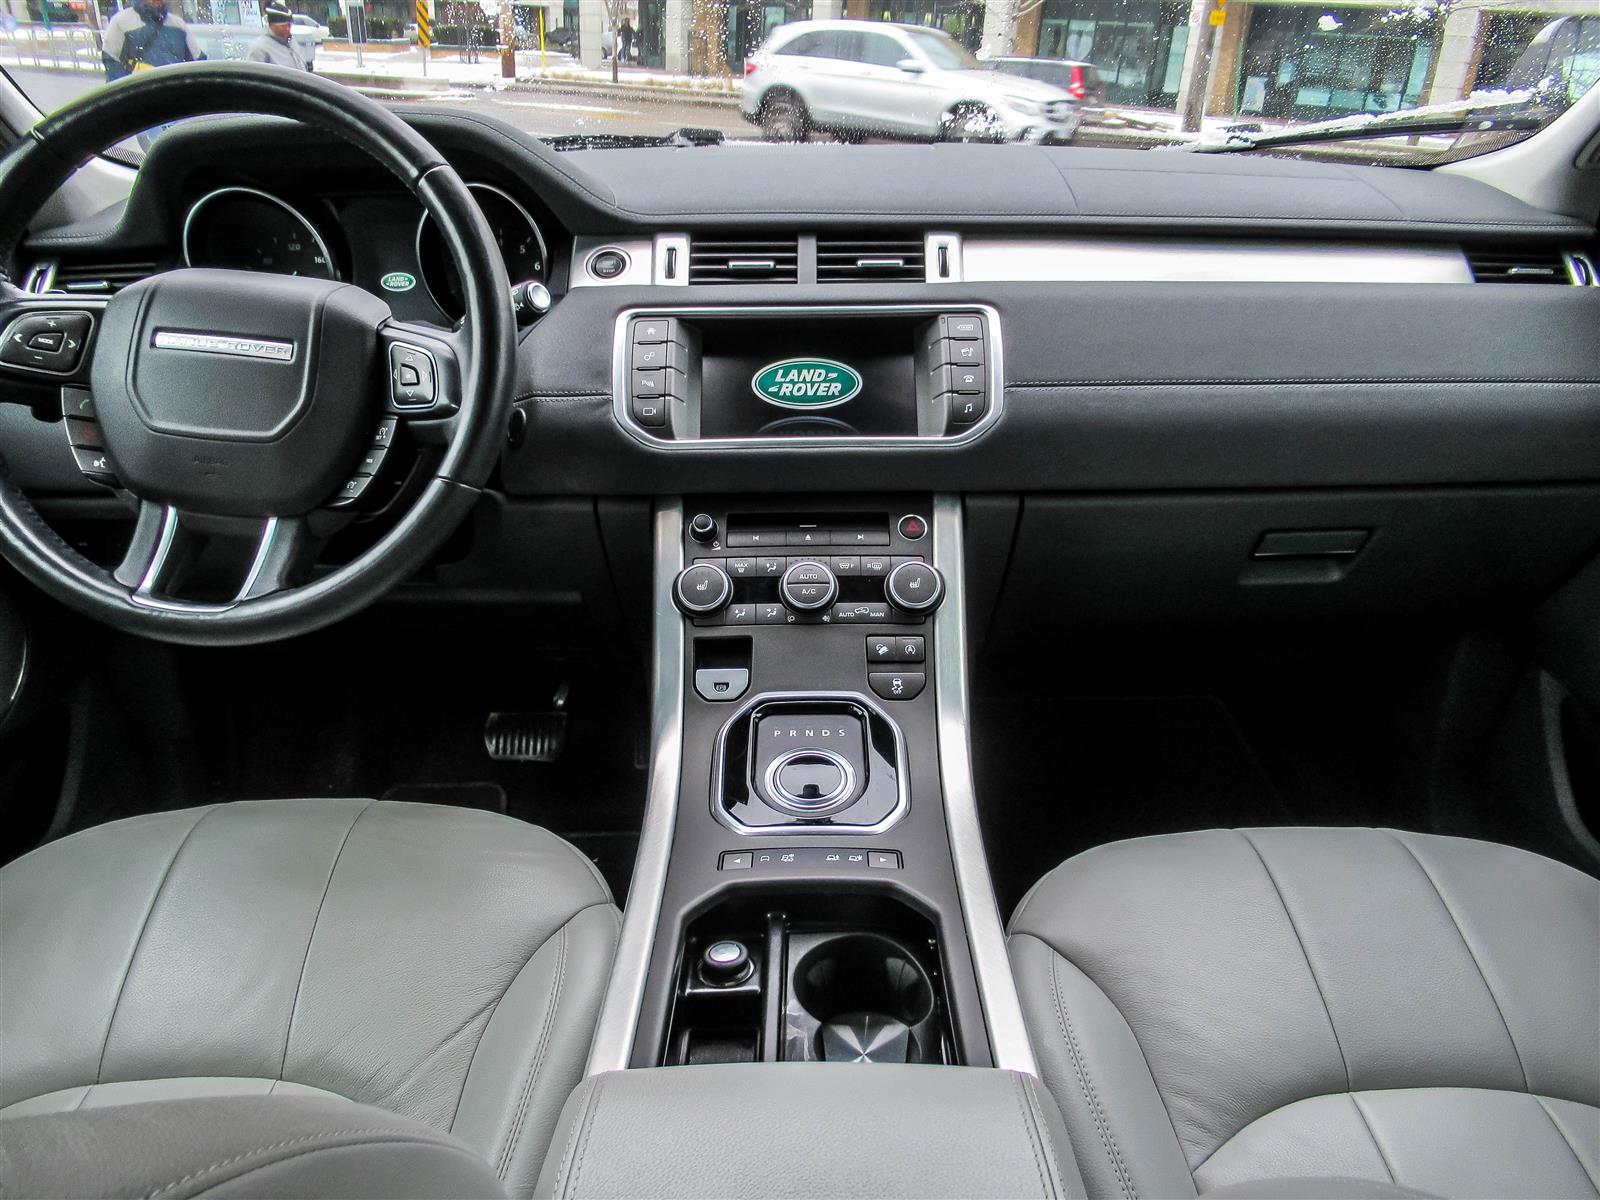 Used 2016 Land Rover Range Rover Evoque in Barrie,ON